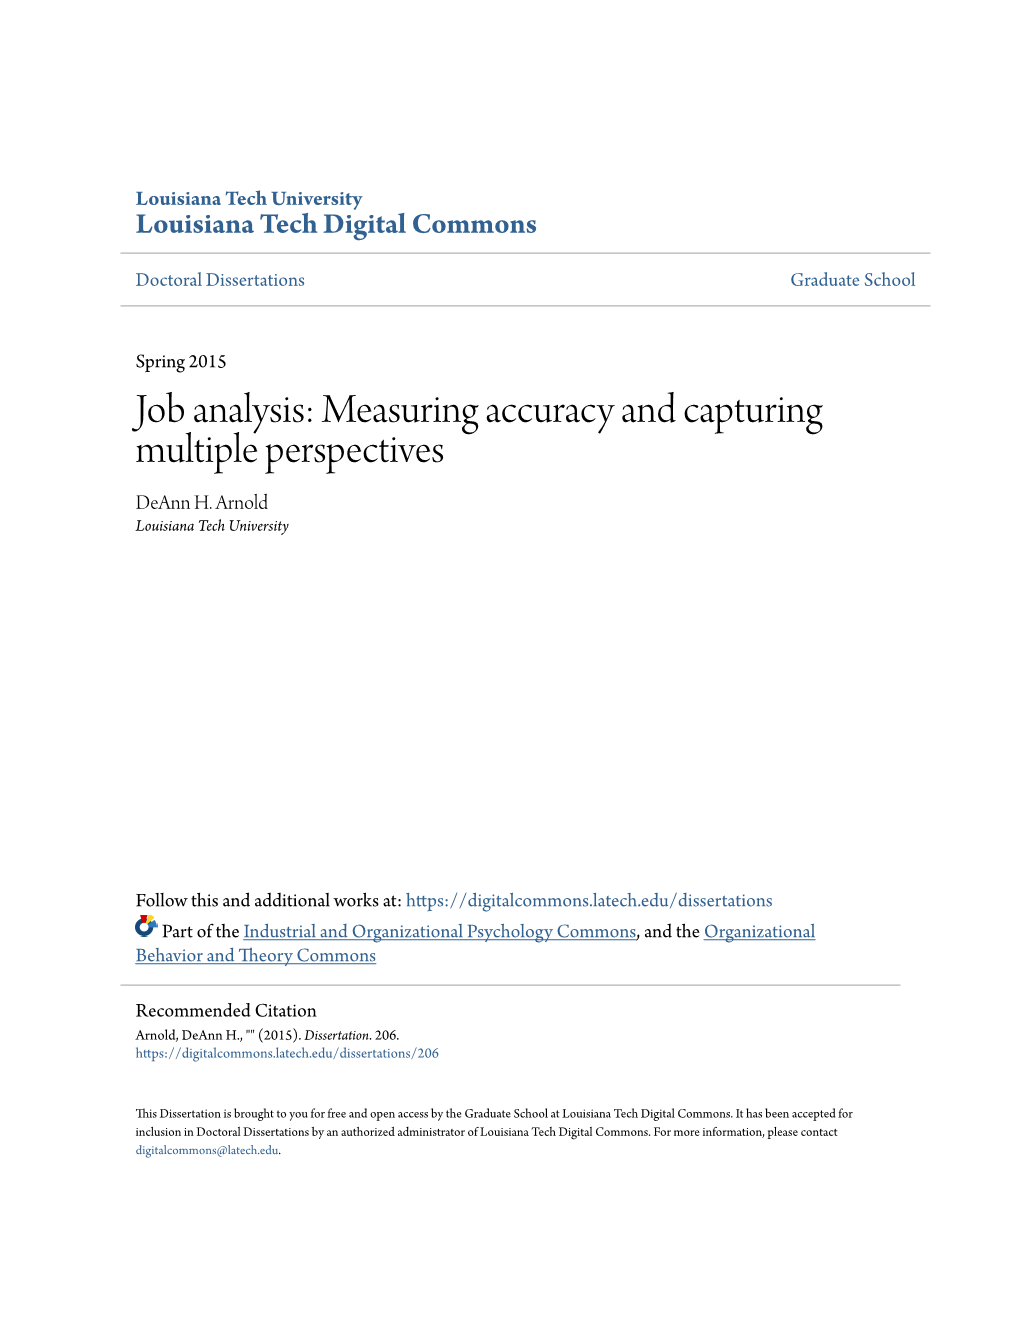 Job Analysis: Measuring Accuracy and Capturing Multiple Perspectives Deann H